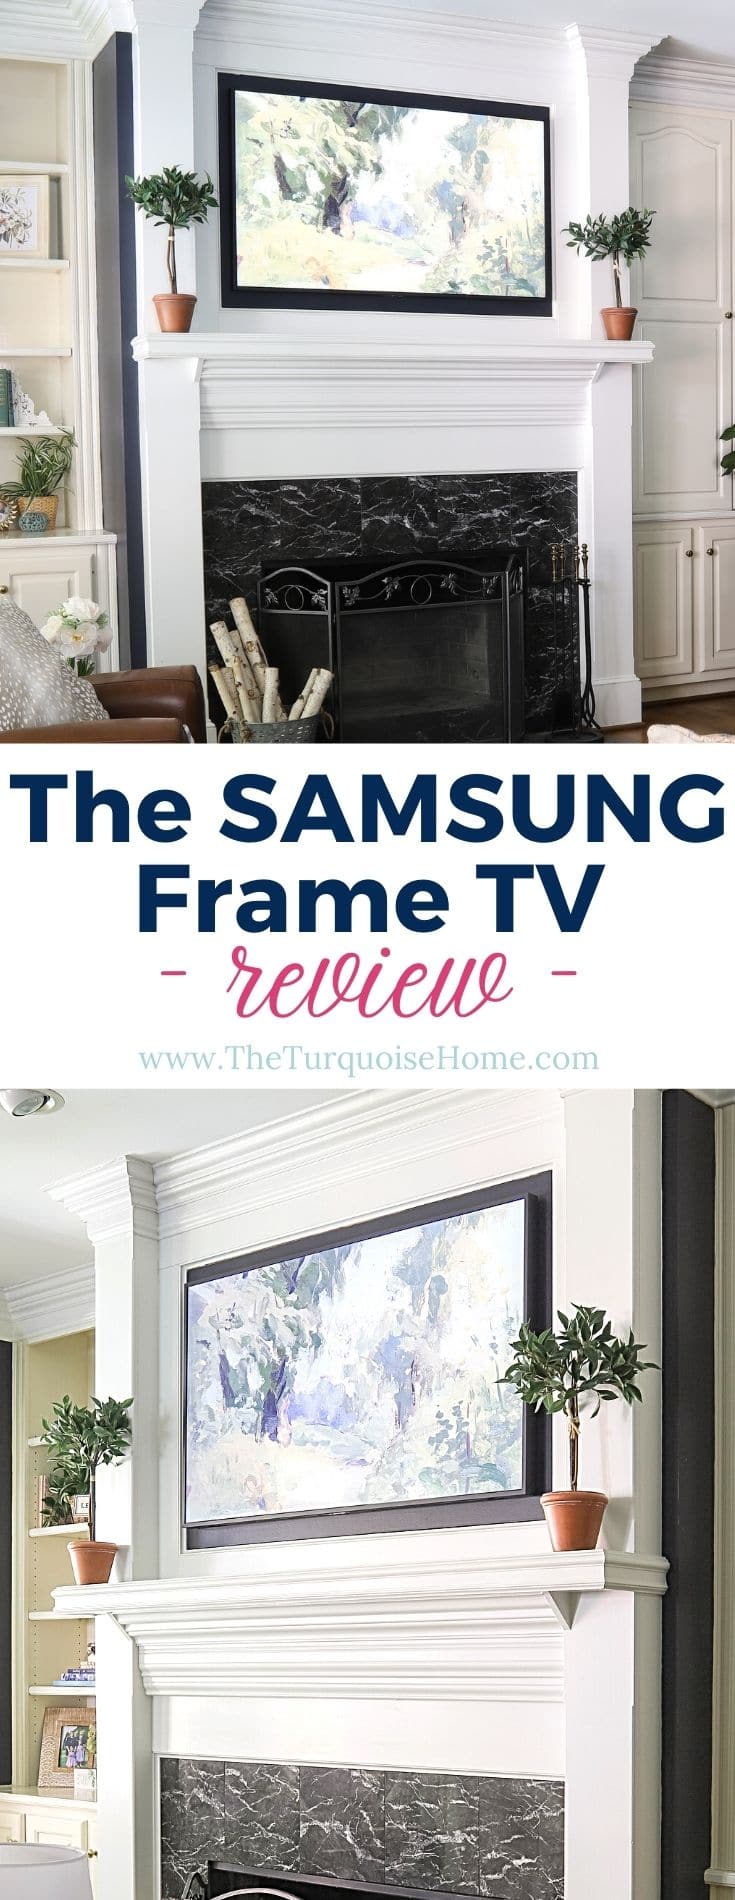 The Samsung Frame TV Review Is It Worth It?? The Turquoise Home